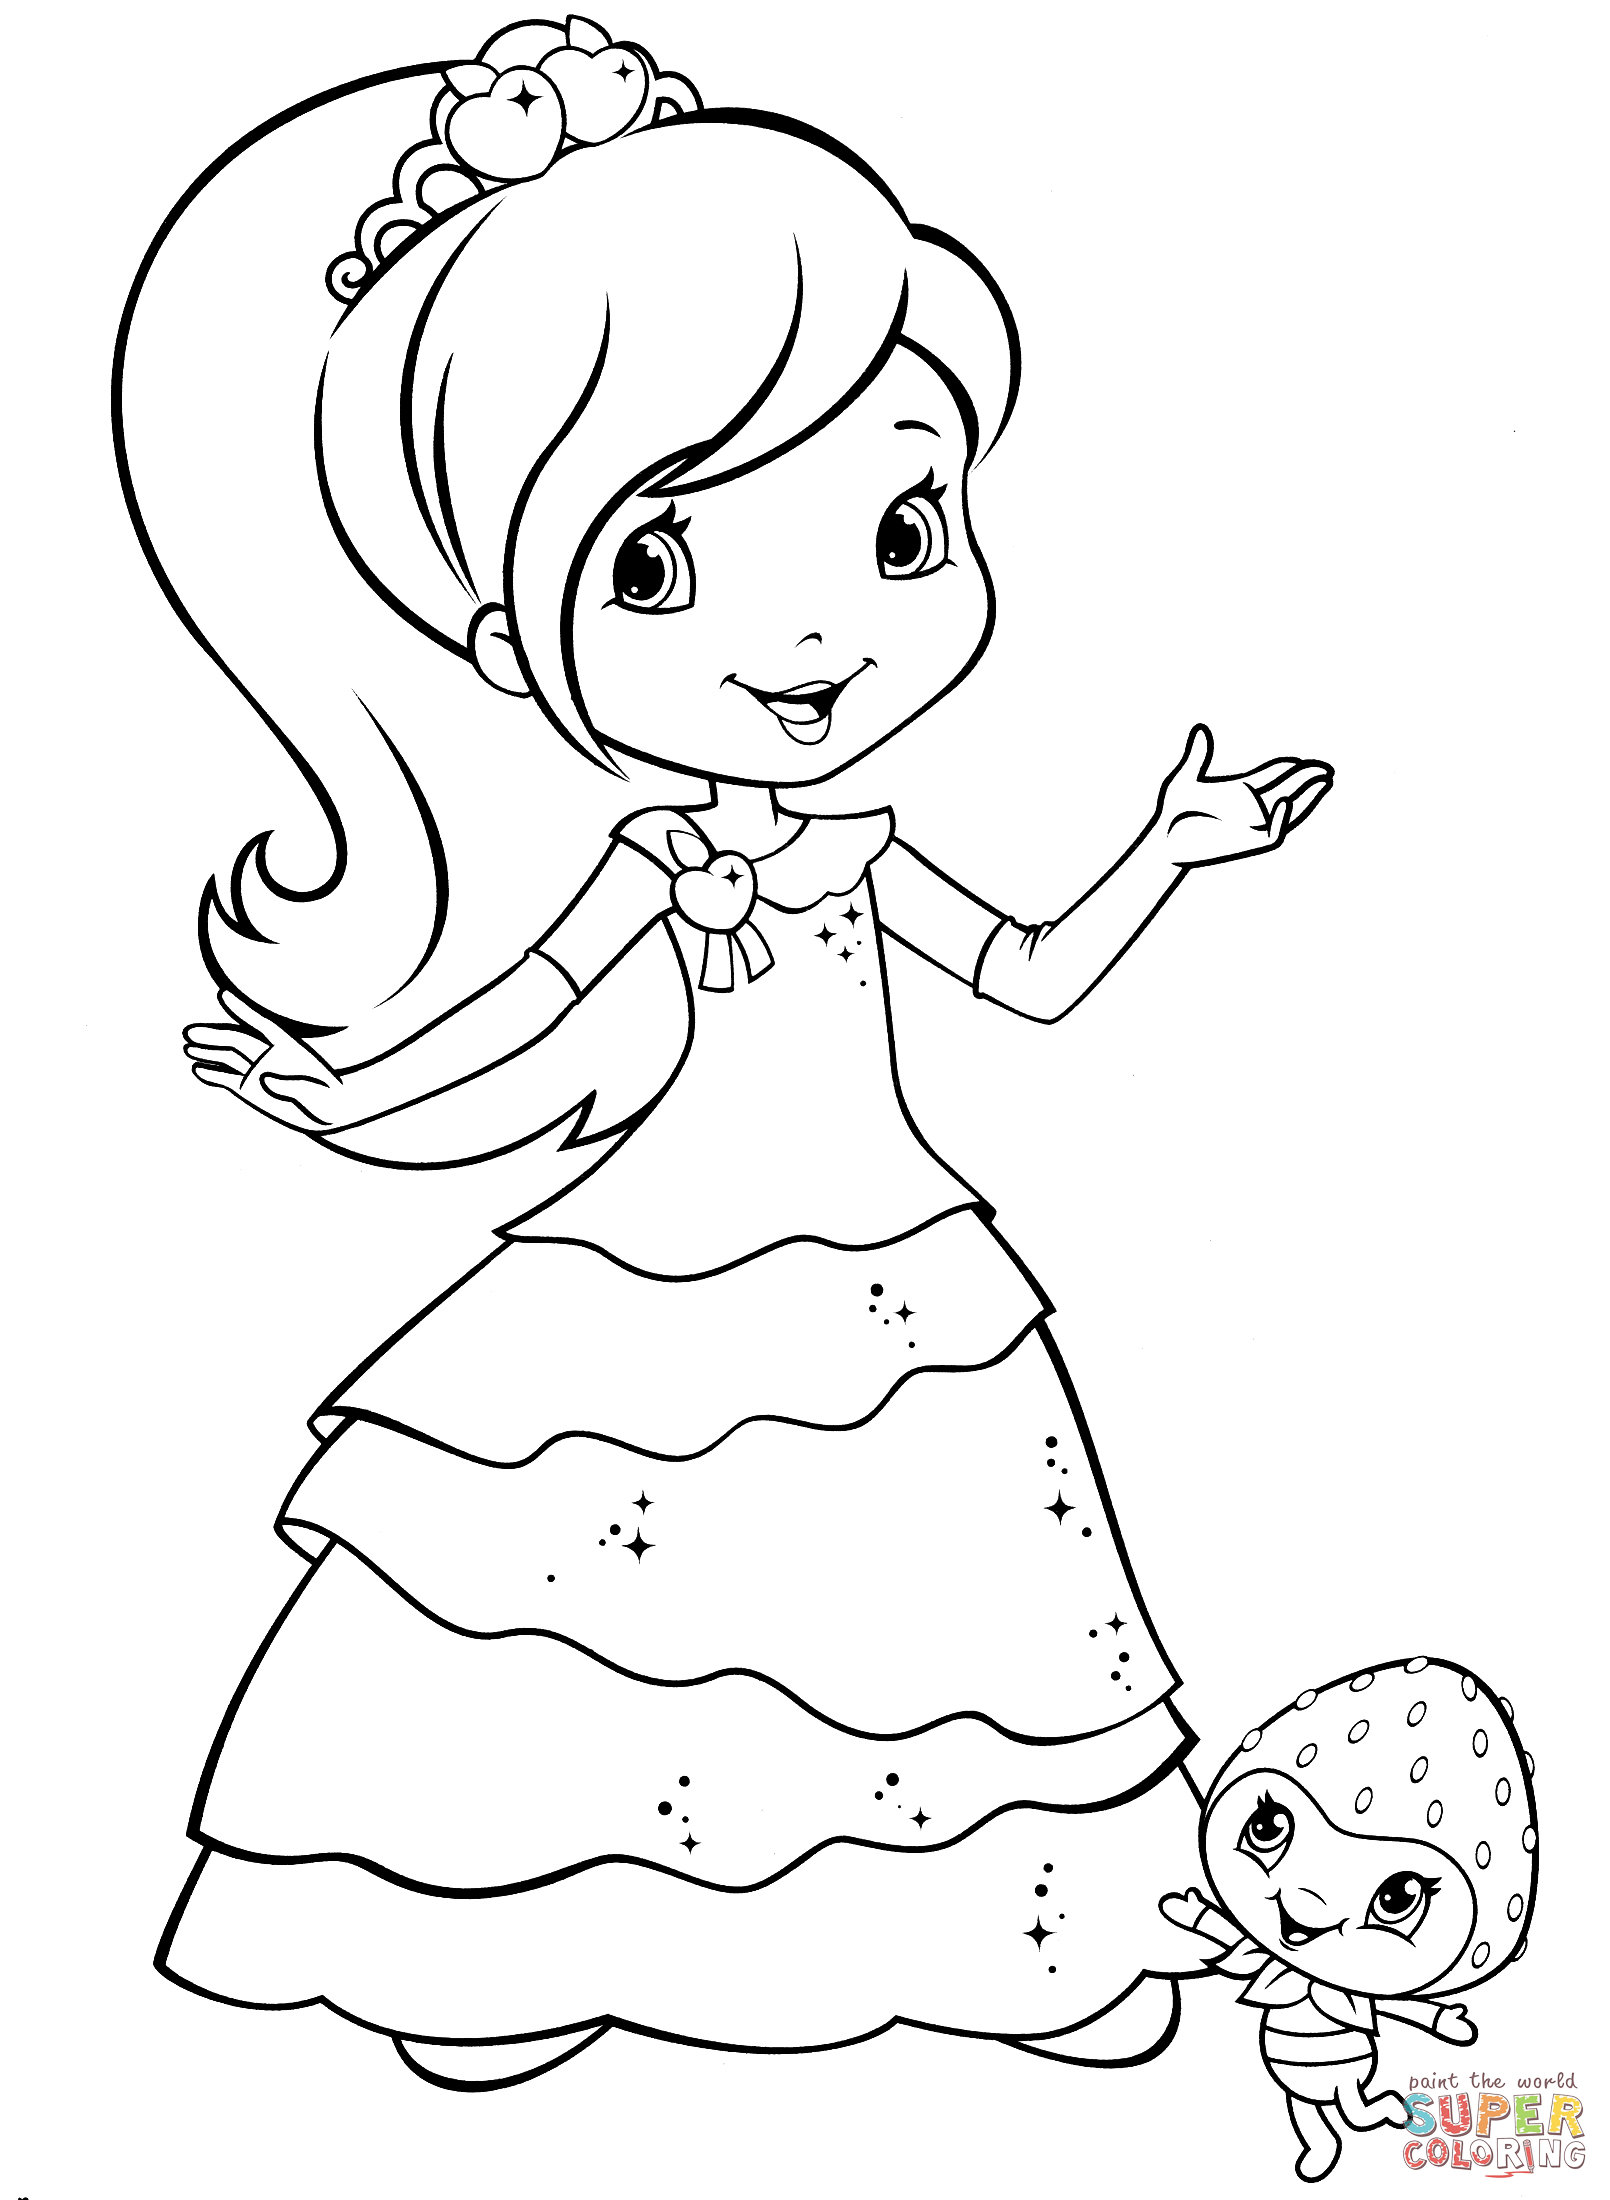 Plum Pudding and Berrykin coloring page | Free Printable Coloring Pages